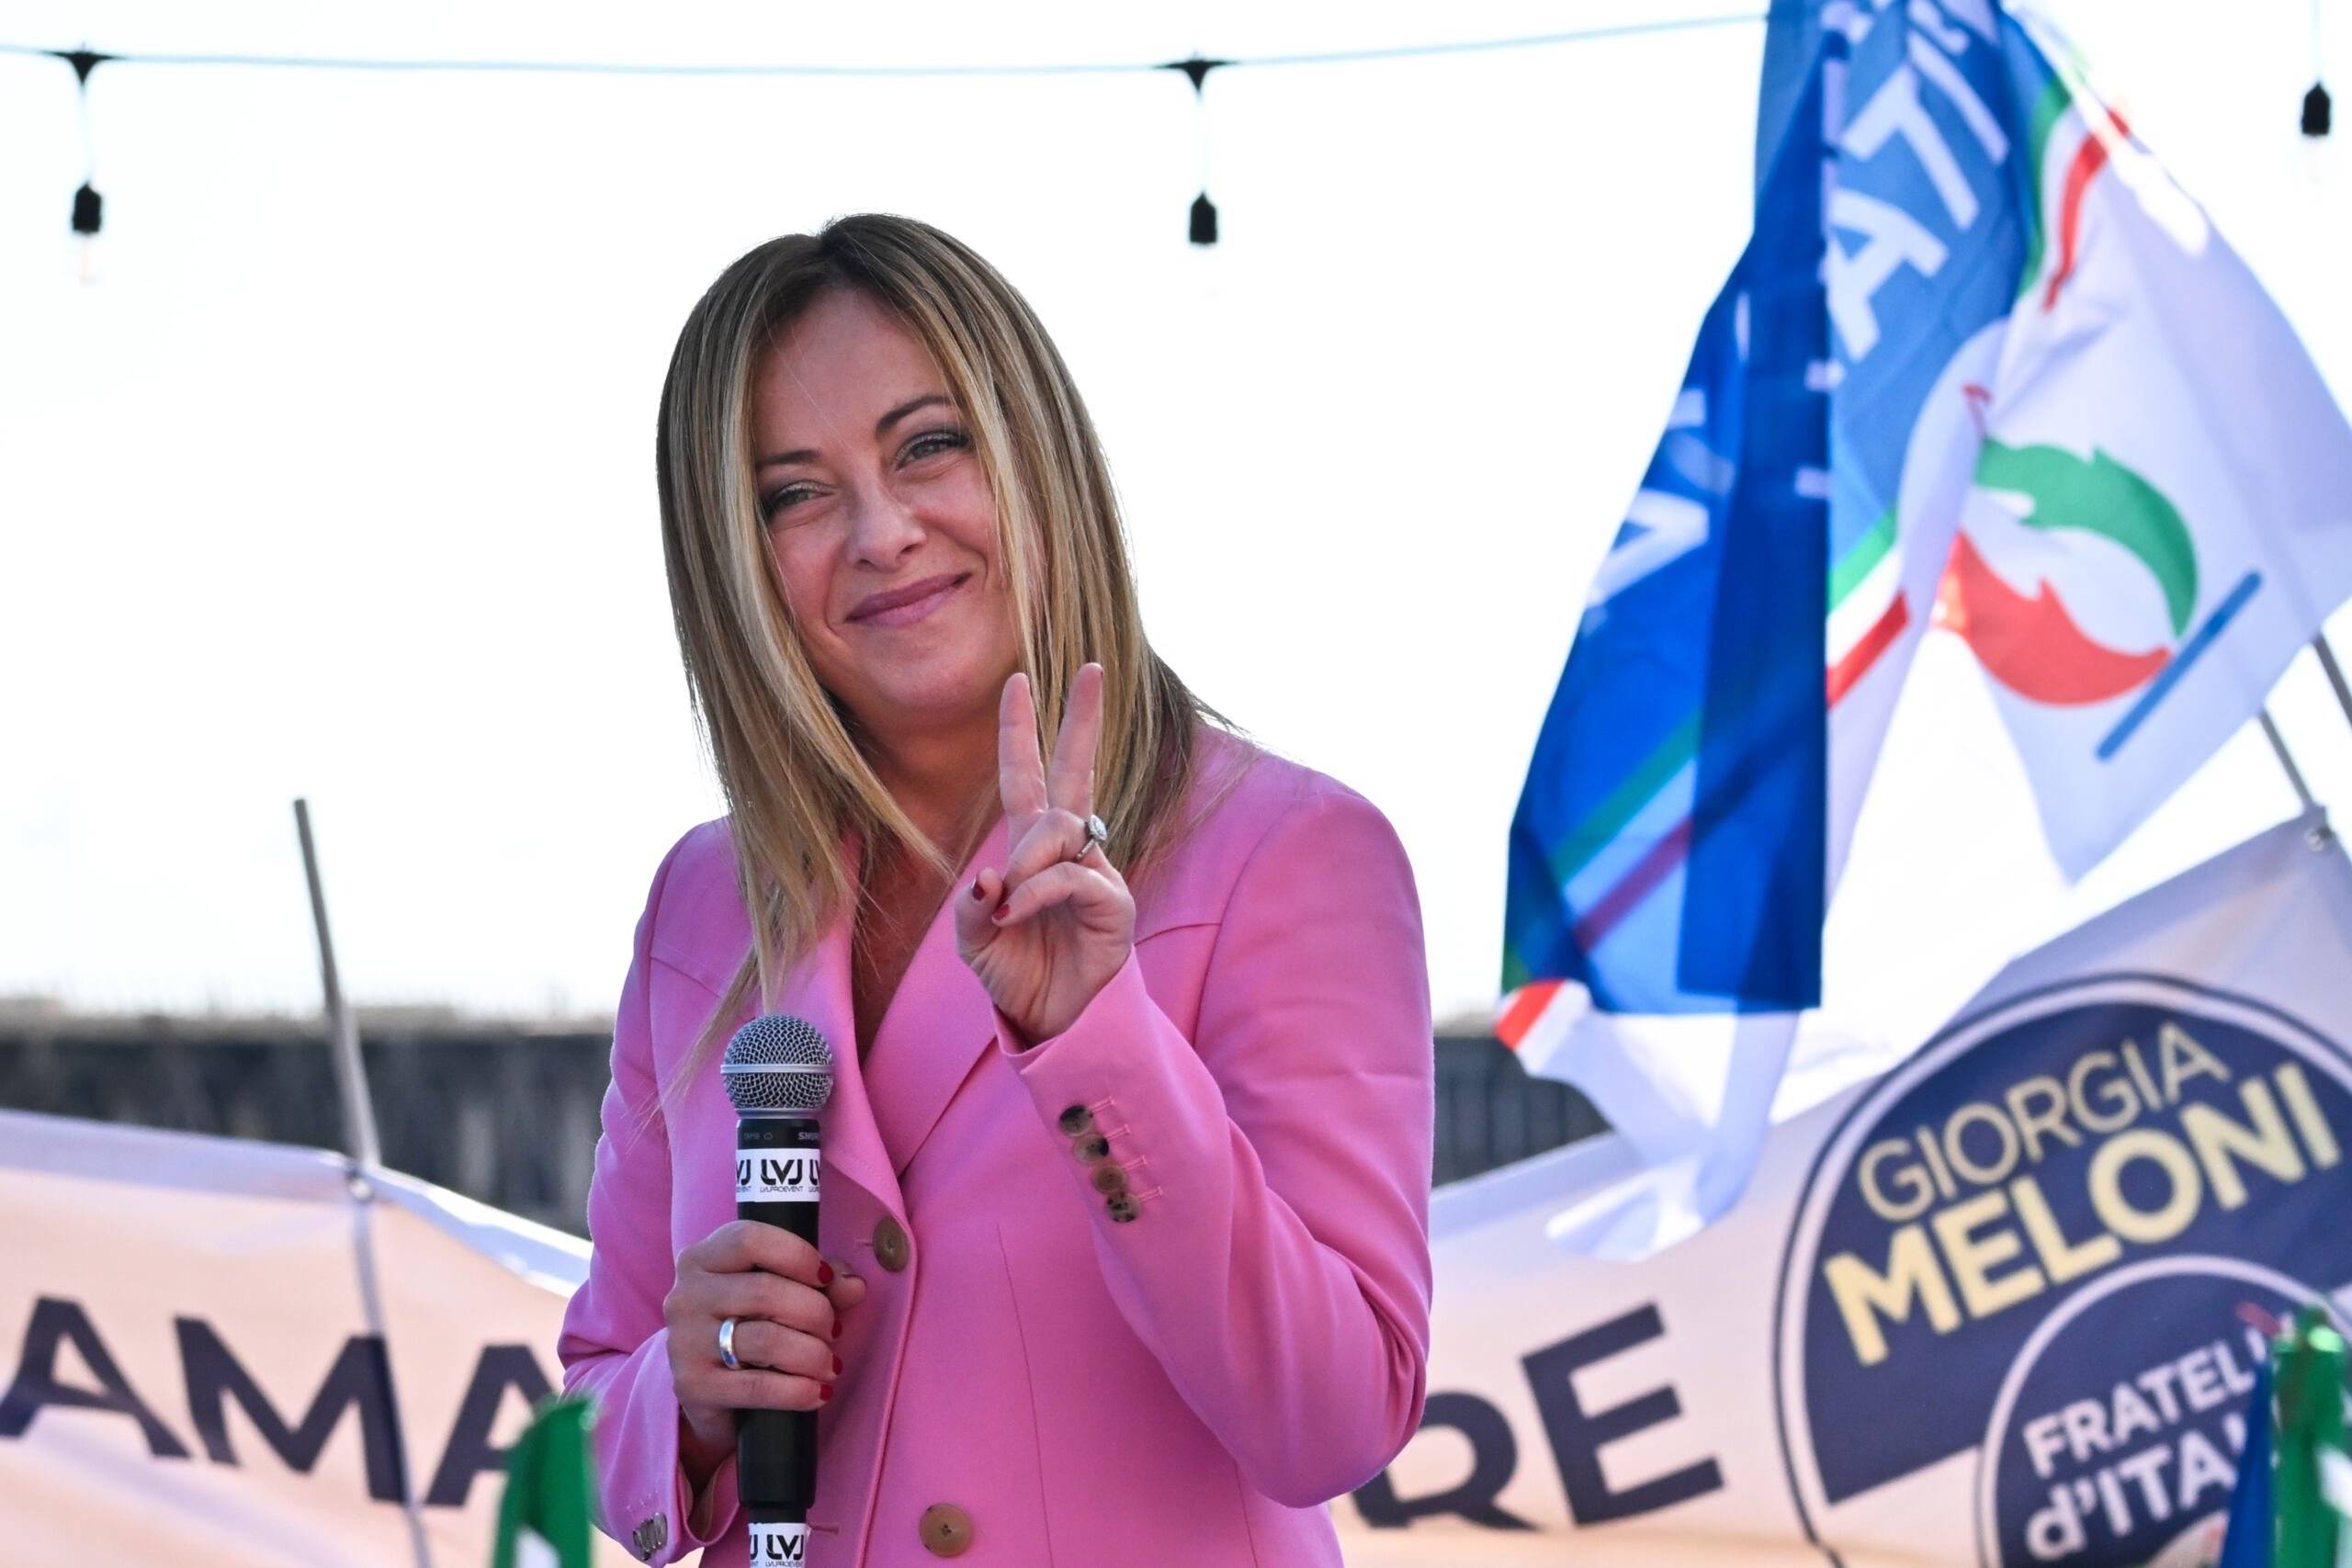 Leader of Italian far-right party "Fratelli d'Italia" (Brothers of Italy), Giorgia Meloni flashes the victory sign as she delivers a speech on September 23, 2022 at the Arenile di Bagnoli beachfront location in Naples, southern Italy, during a rally closing her party's campaign for the September 25 general election. (Photo by Andreas SOLARO / AFP)